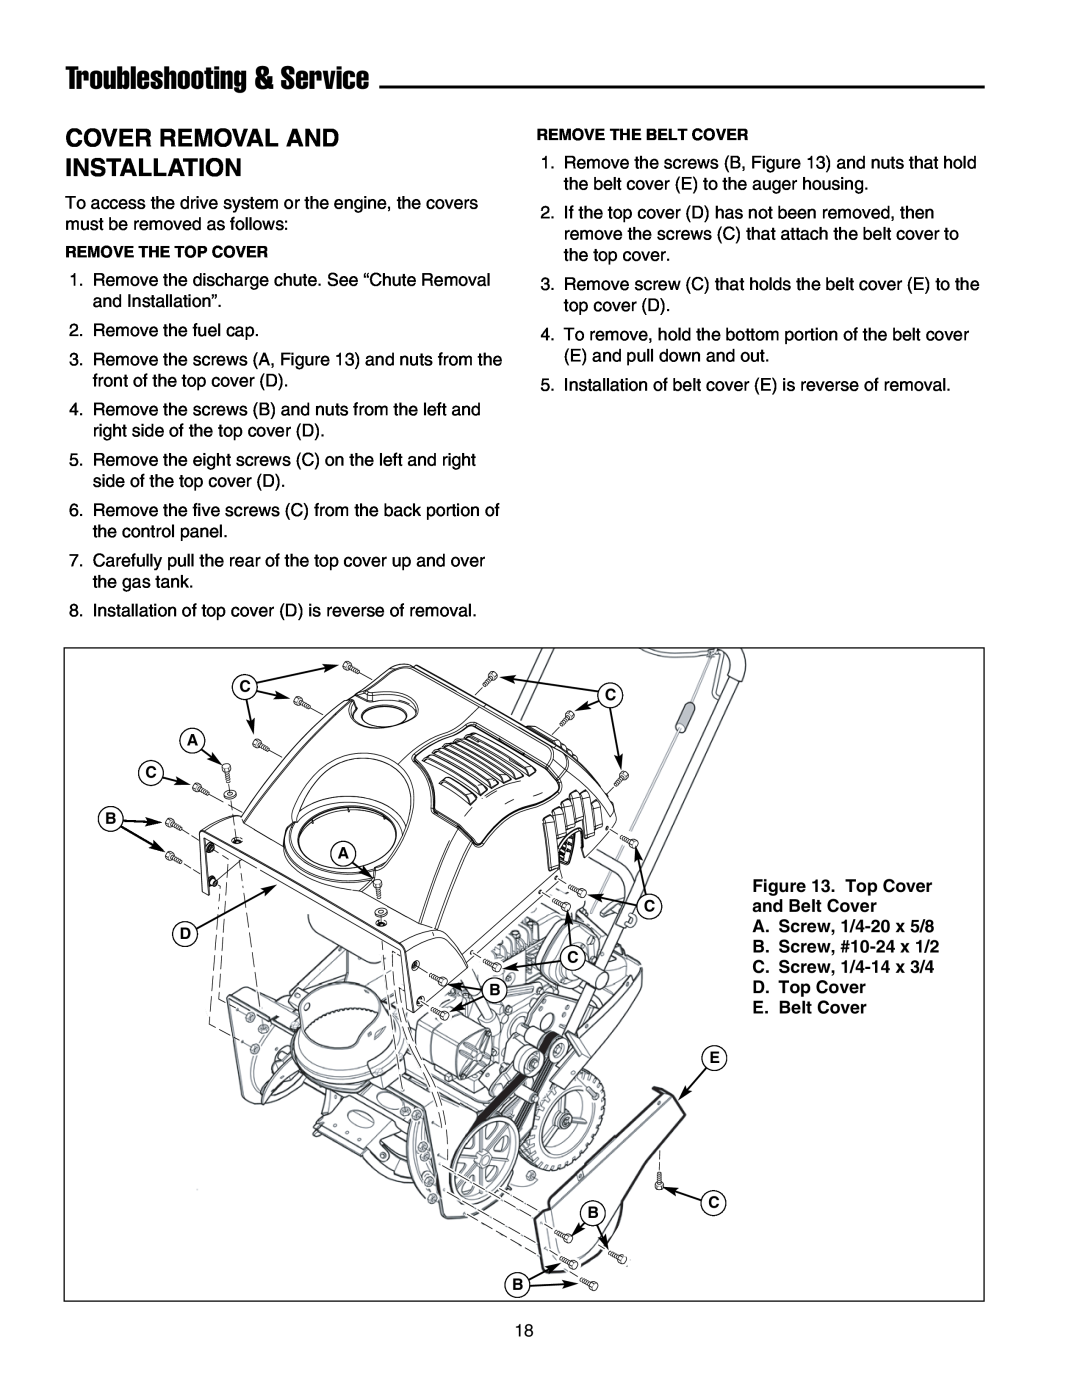 Simplicity 1695468, 1695514 Troubleshooting & Service, Cover Removal And Installation, and Belt Cover, D. Top Cover 